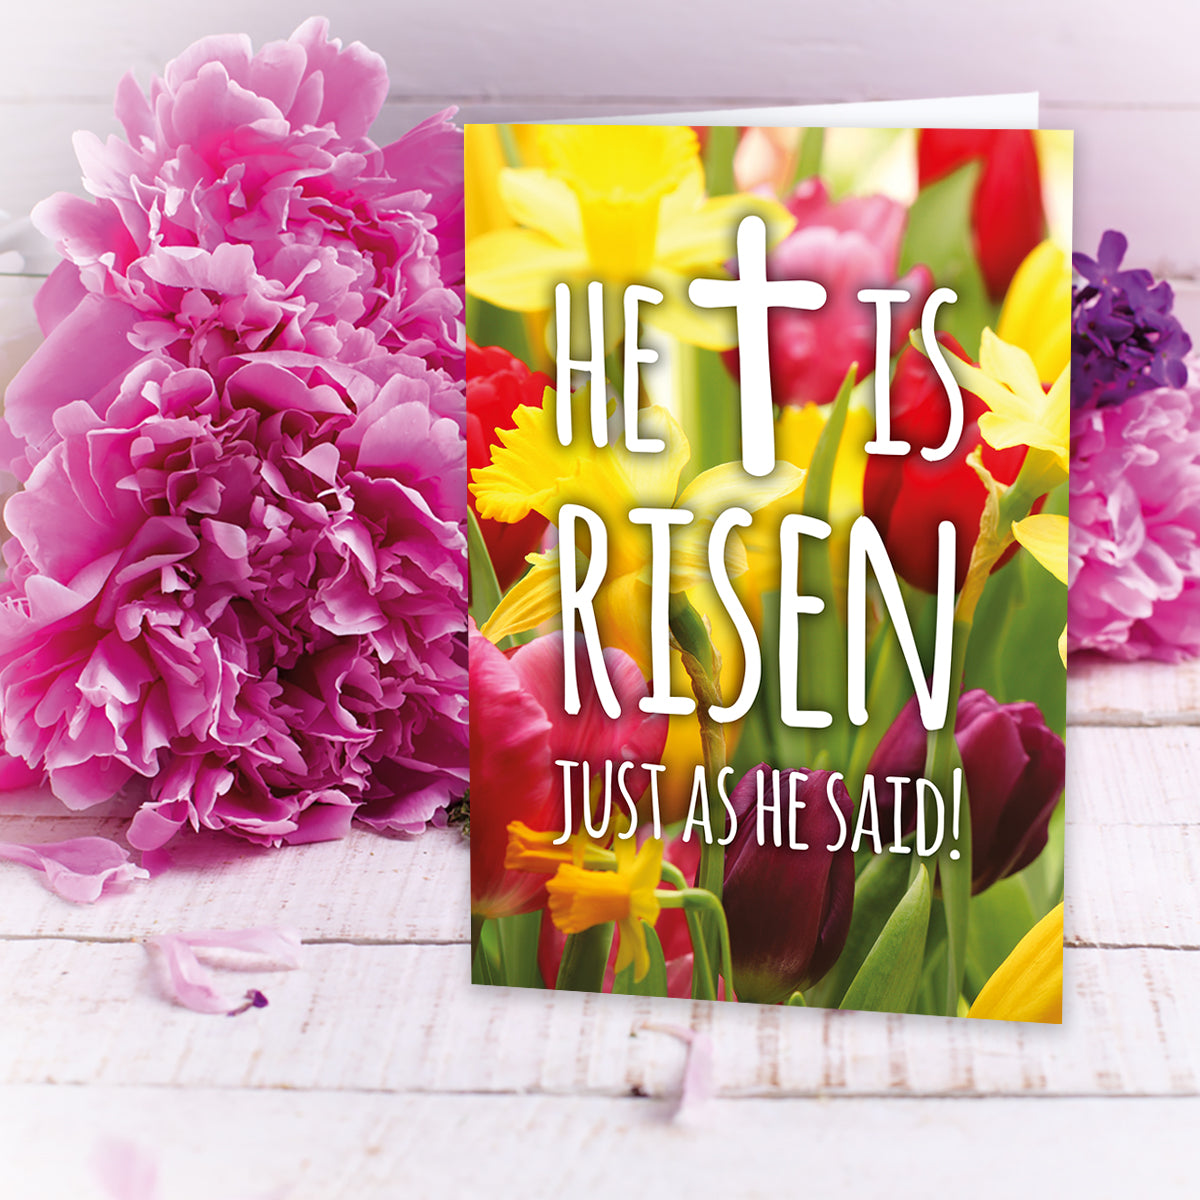 Compassion Charity Easter Cards - Tulips/He Is Risen (pack of 5) - The Christian Gift Company